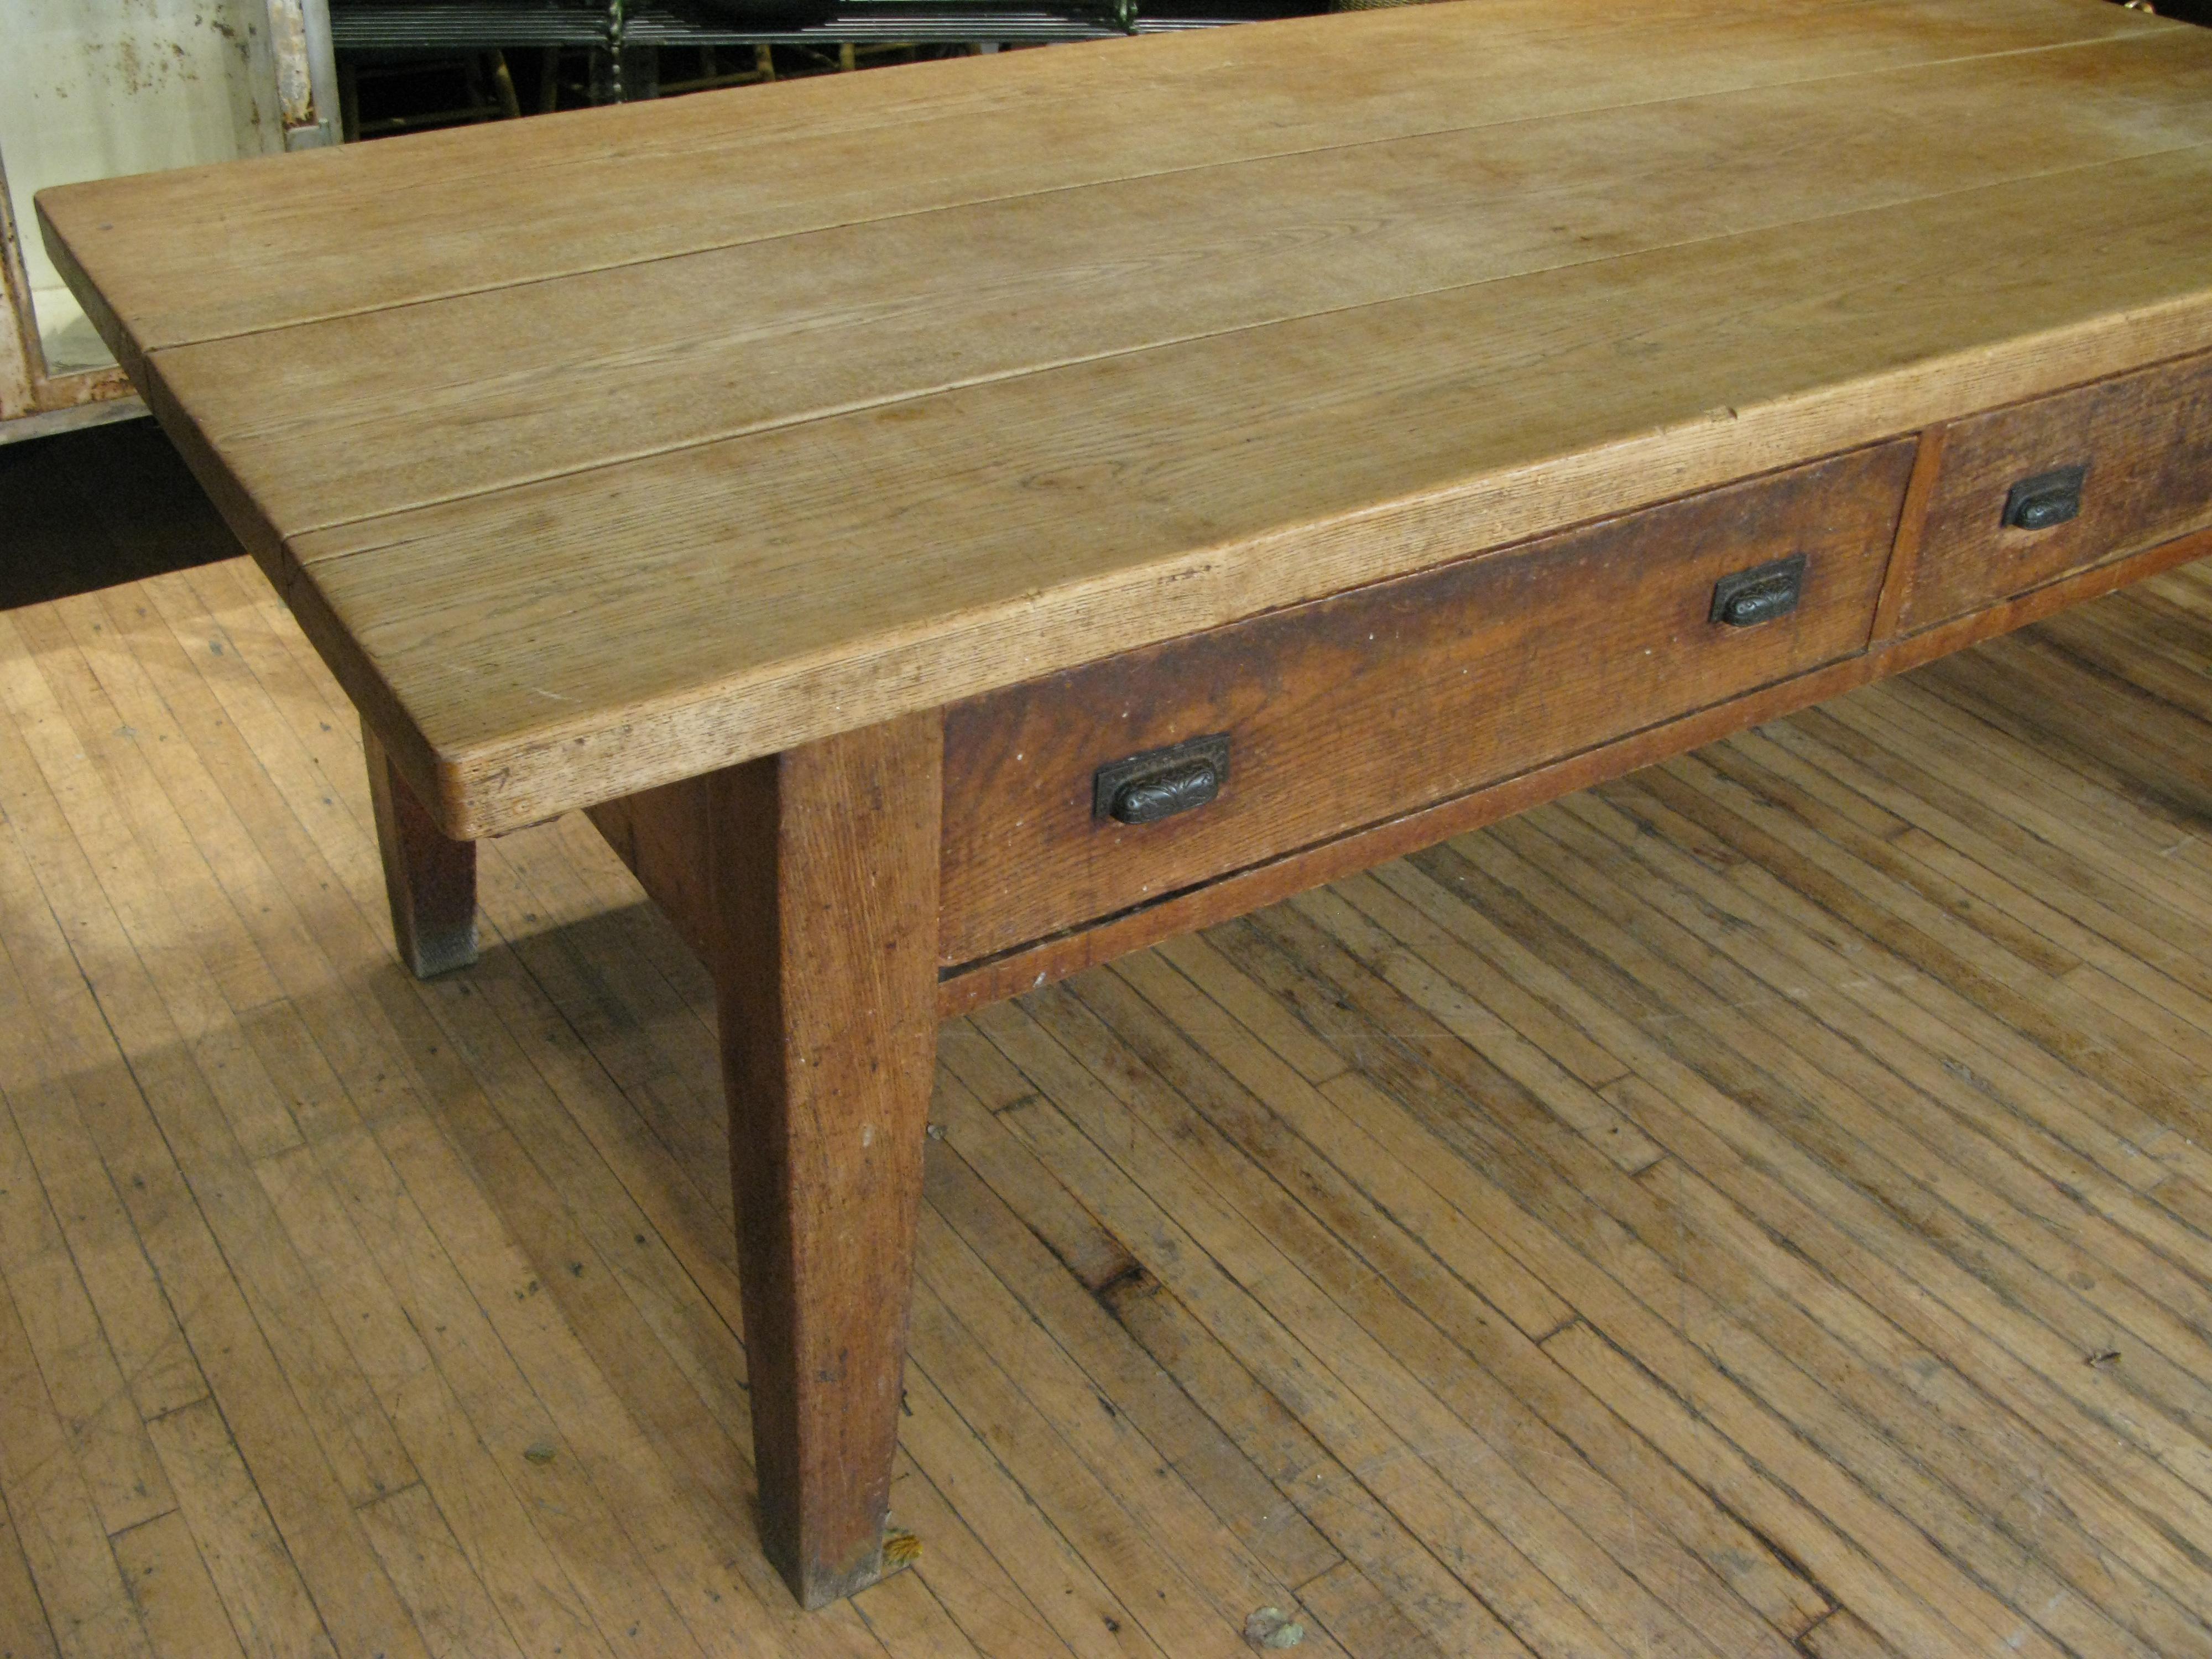 A very handsome large and impressive late 19th century oak refectory table perfect for a kitchen island, with 3